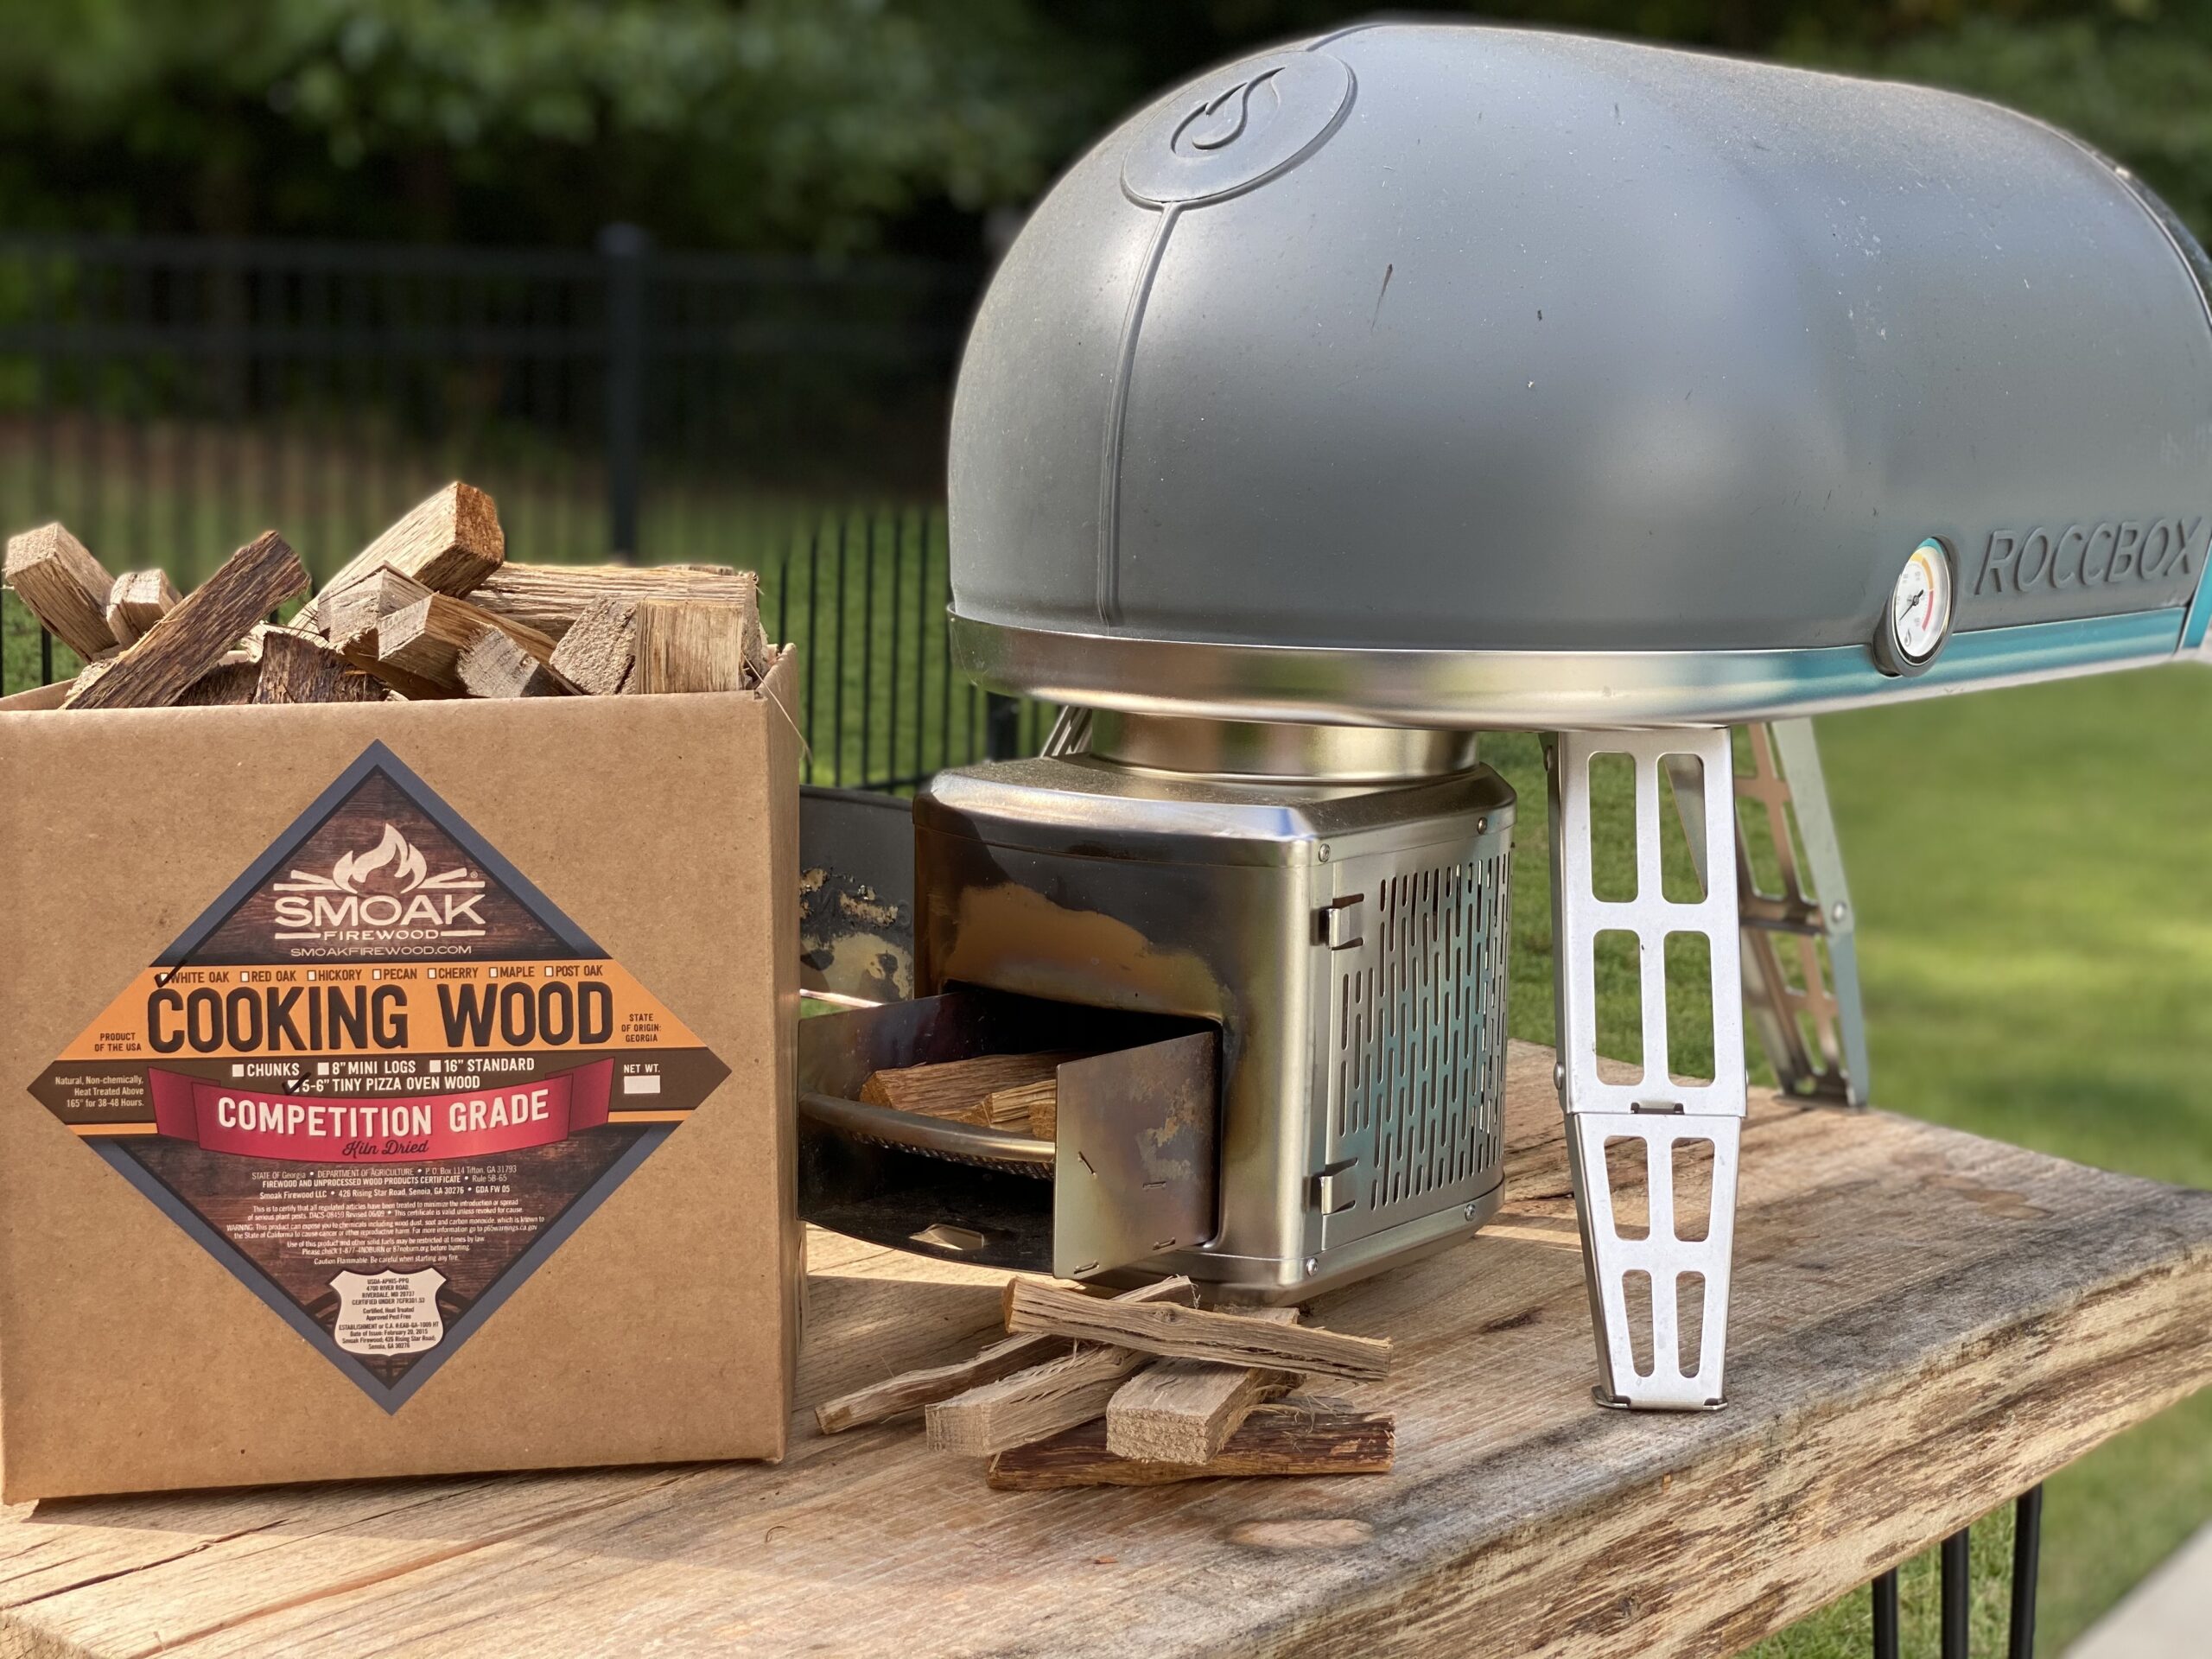 Smoak Firewood's Cooking Wood Mini Splits - USDA Certified Kiln Dried Pizza  Oven Wood, Grilling Wood, Smoking Wood, BBQing Wood (8inch Pieces, 8-10lbs